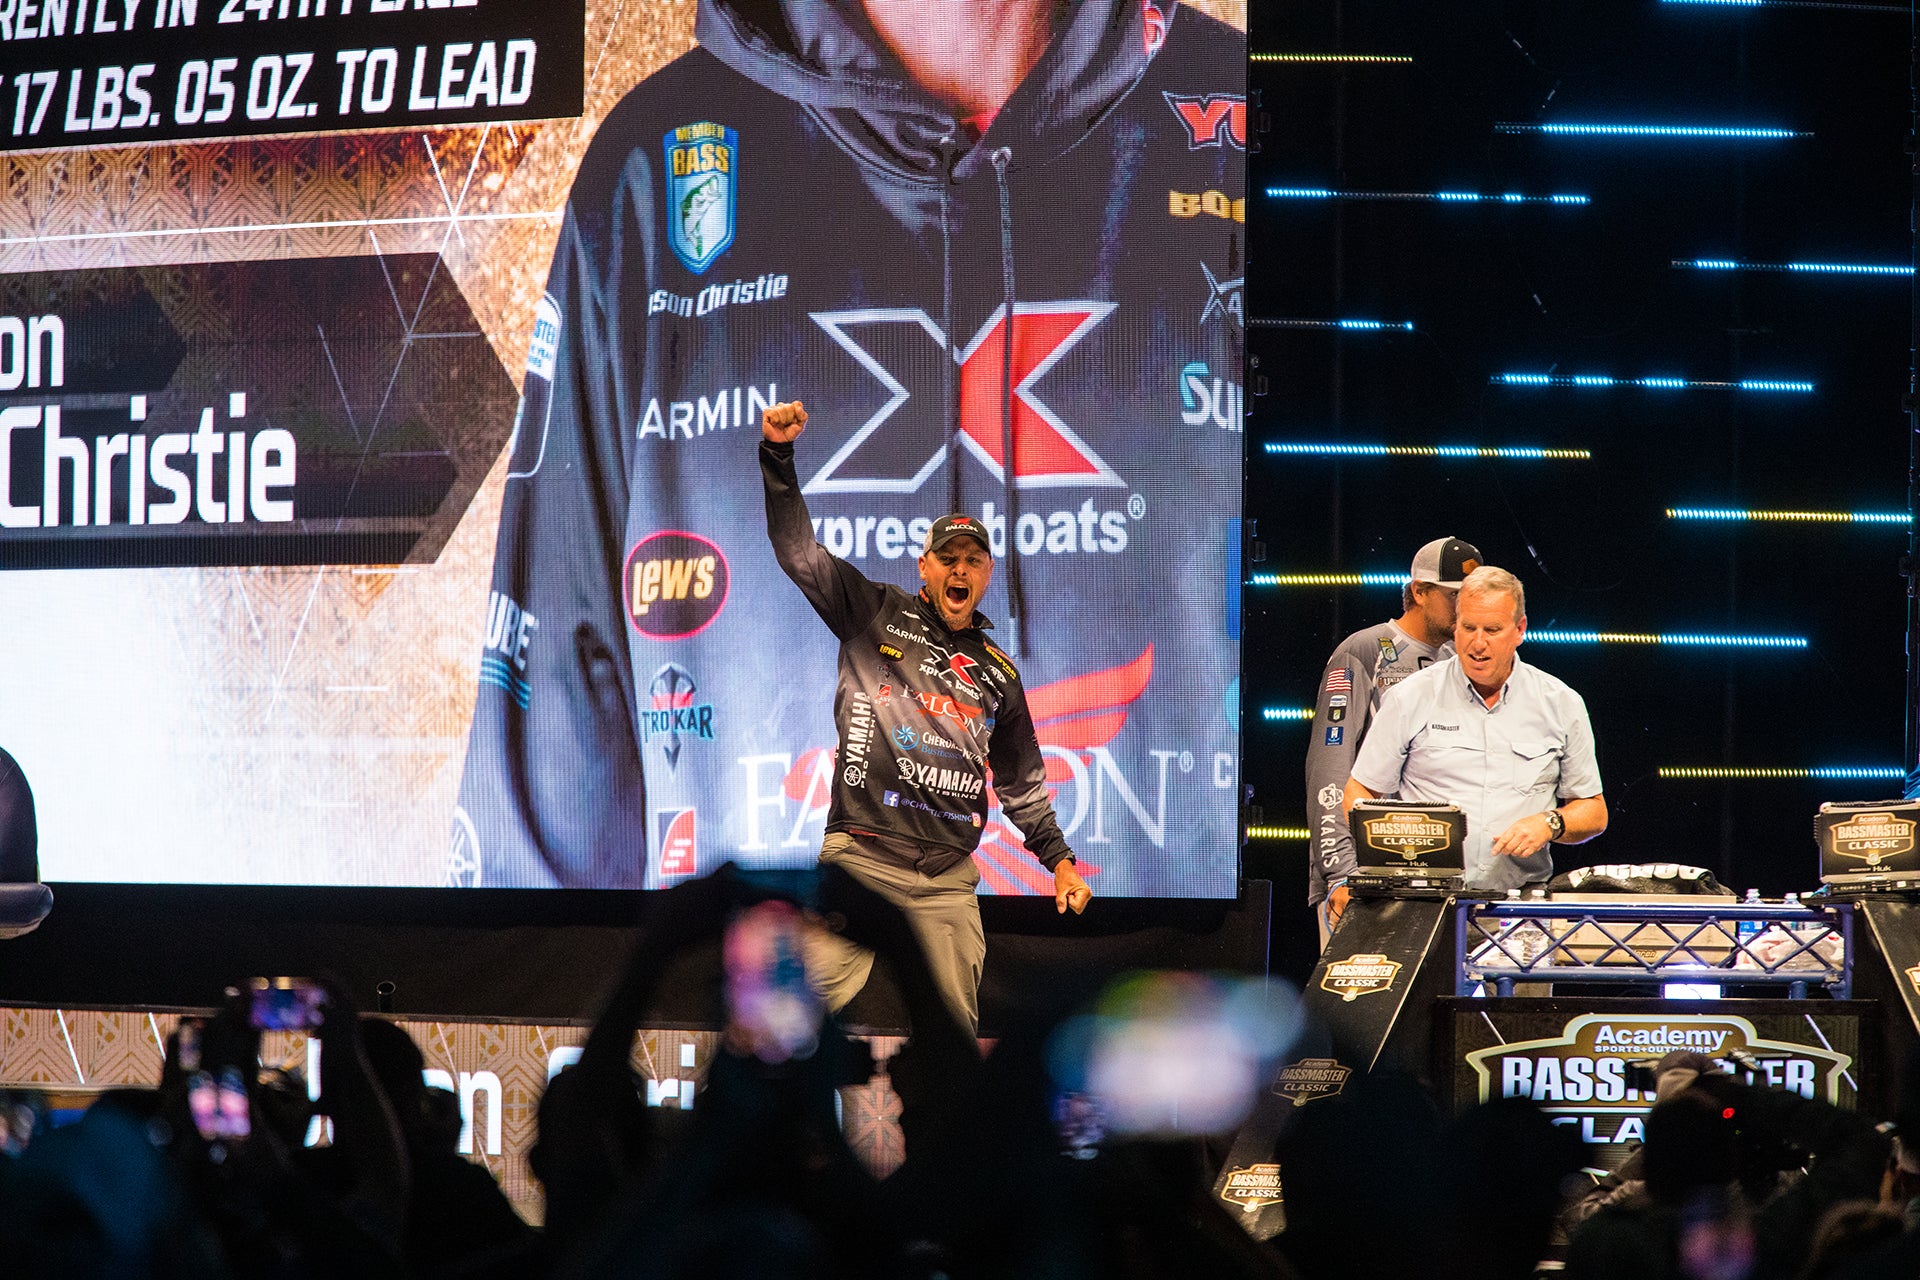 Jason Christie Fisting the air after winning the bassmaster classic